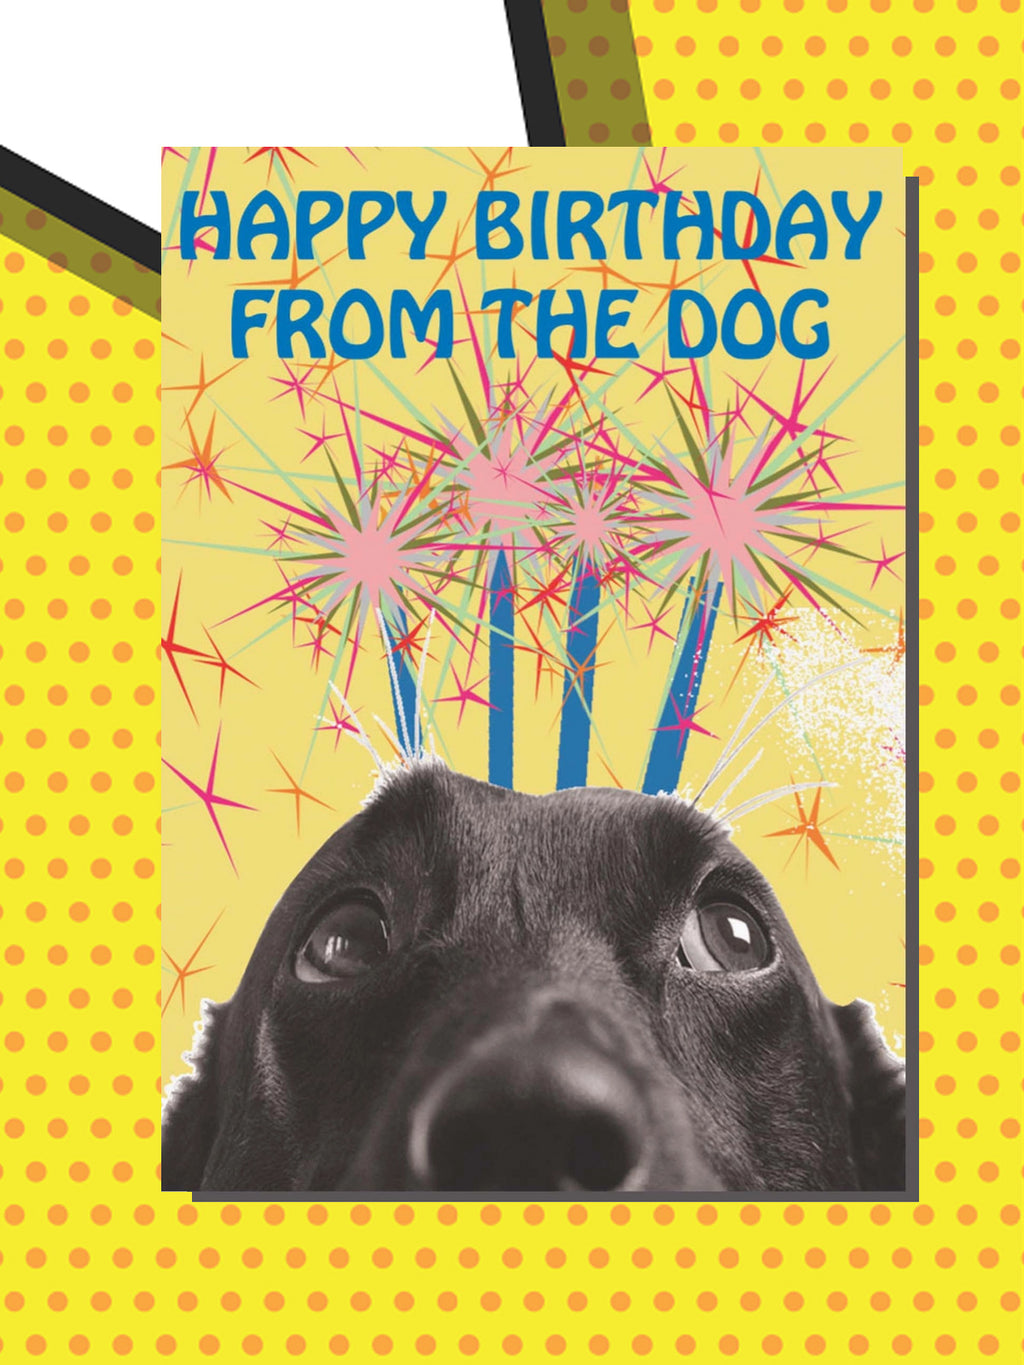 Greeting Card - Happy Birthday From The Dog